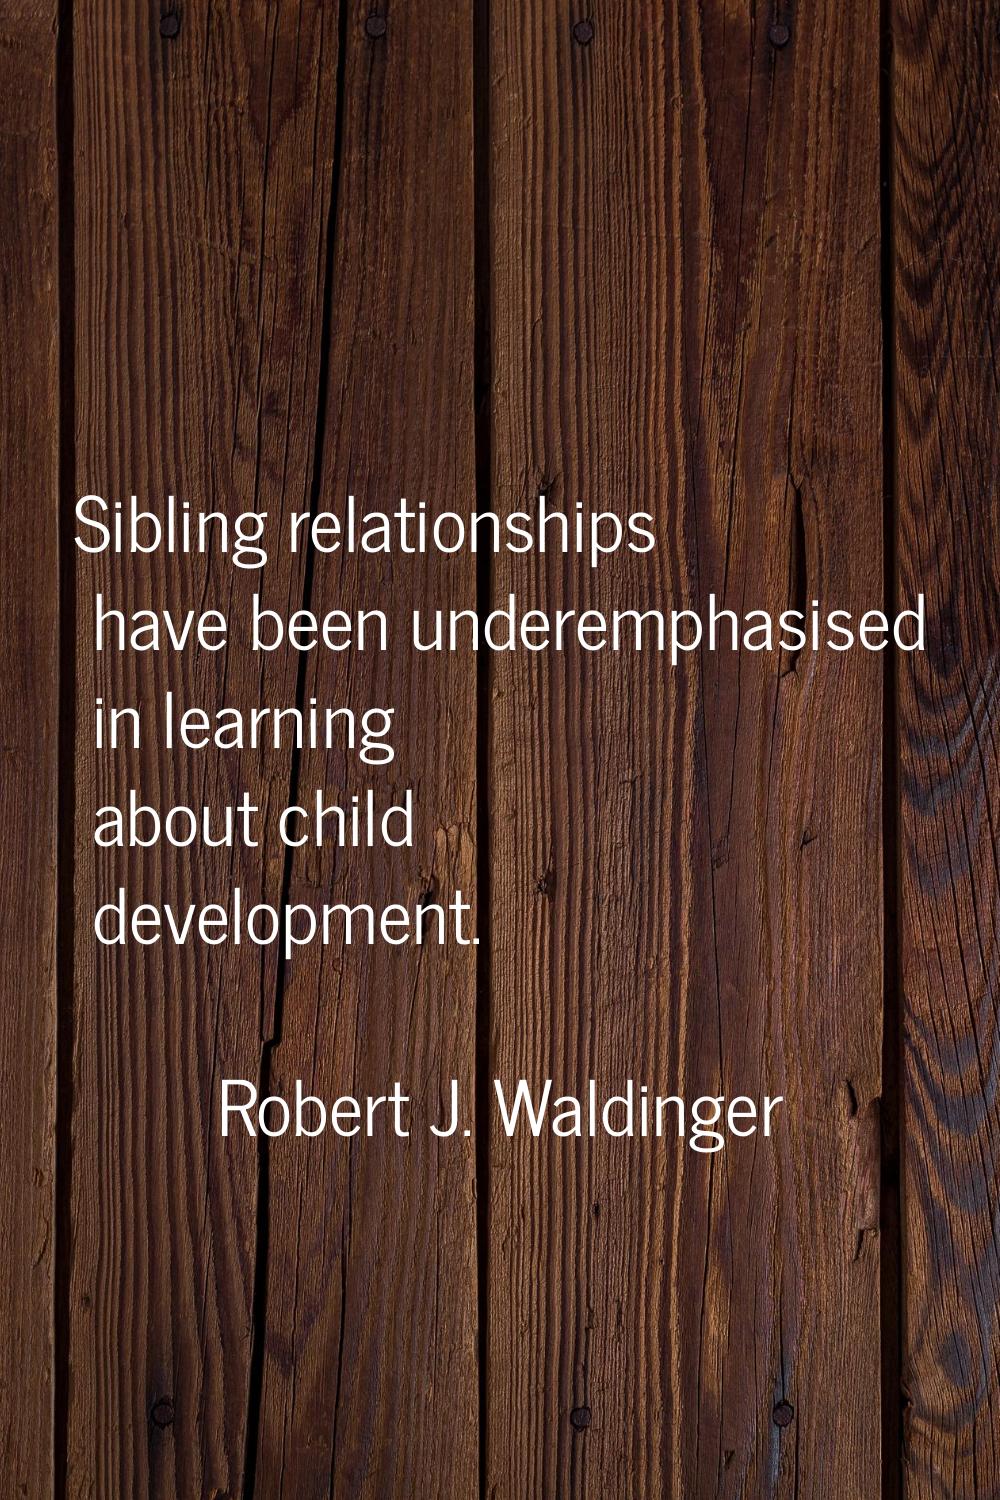 Sibling relationships have been underemphasised in learning about child development.